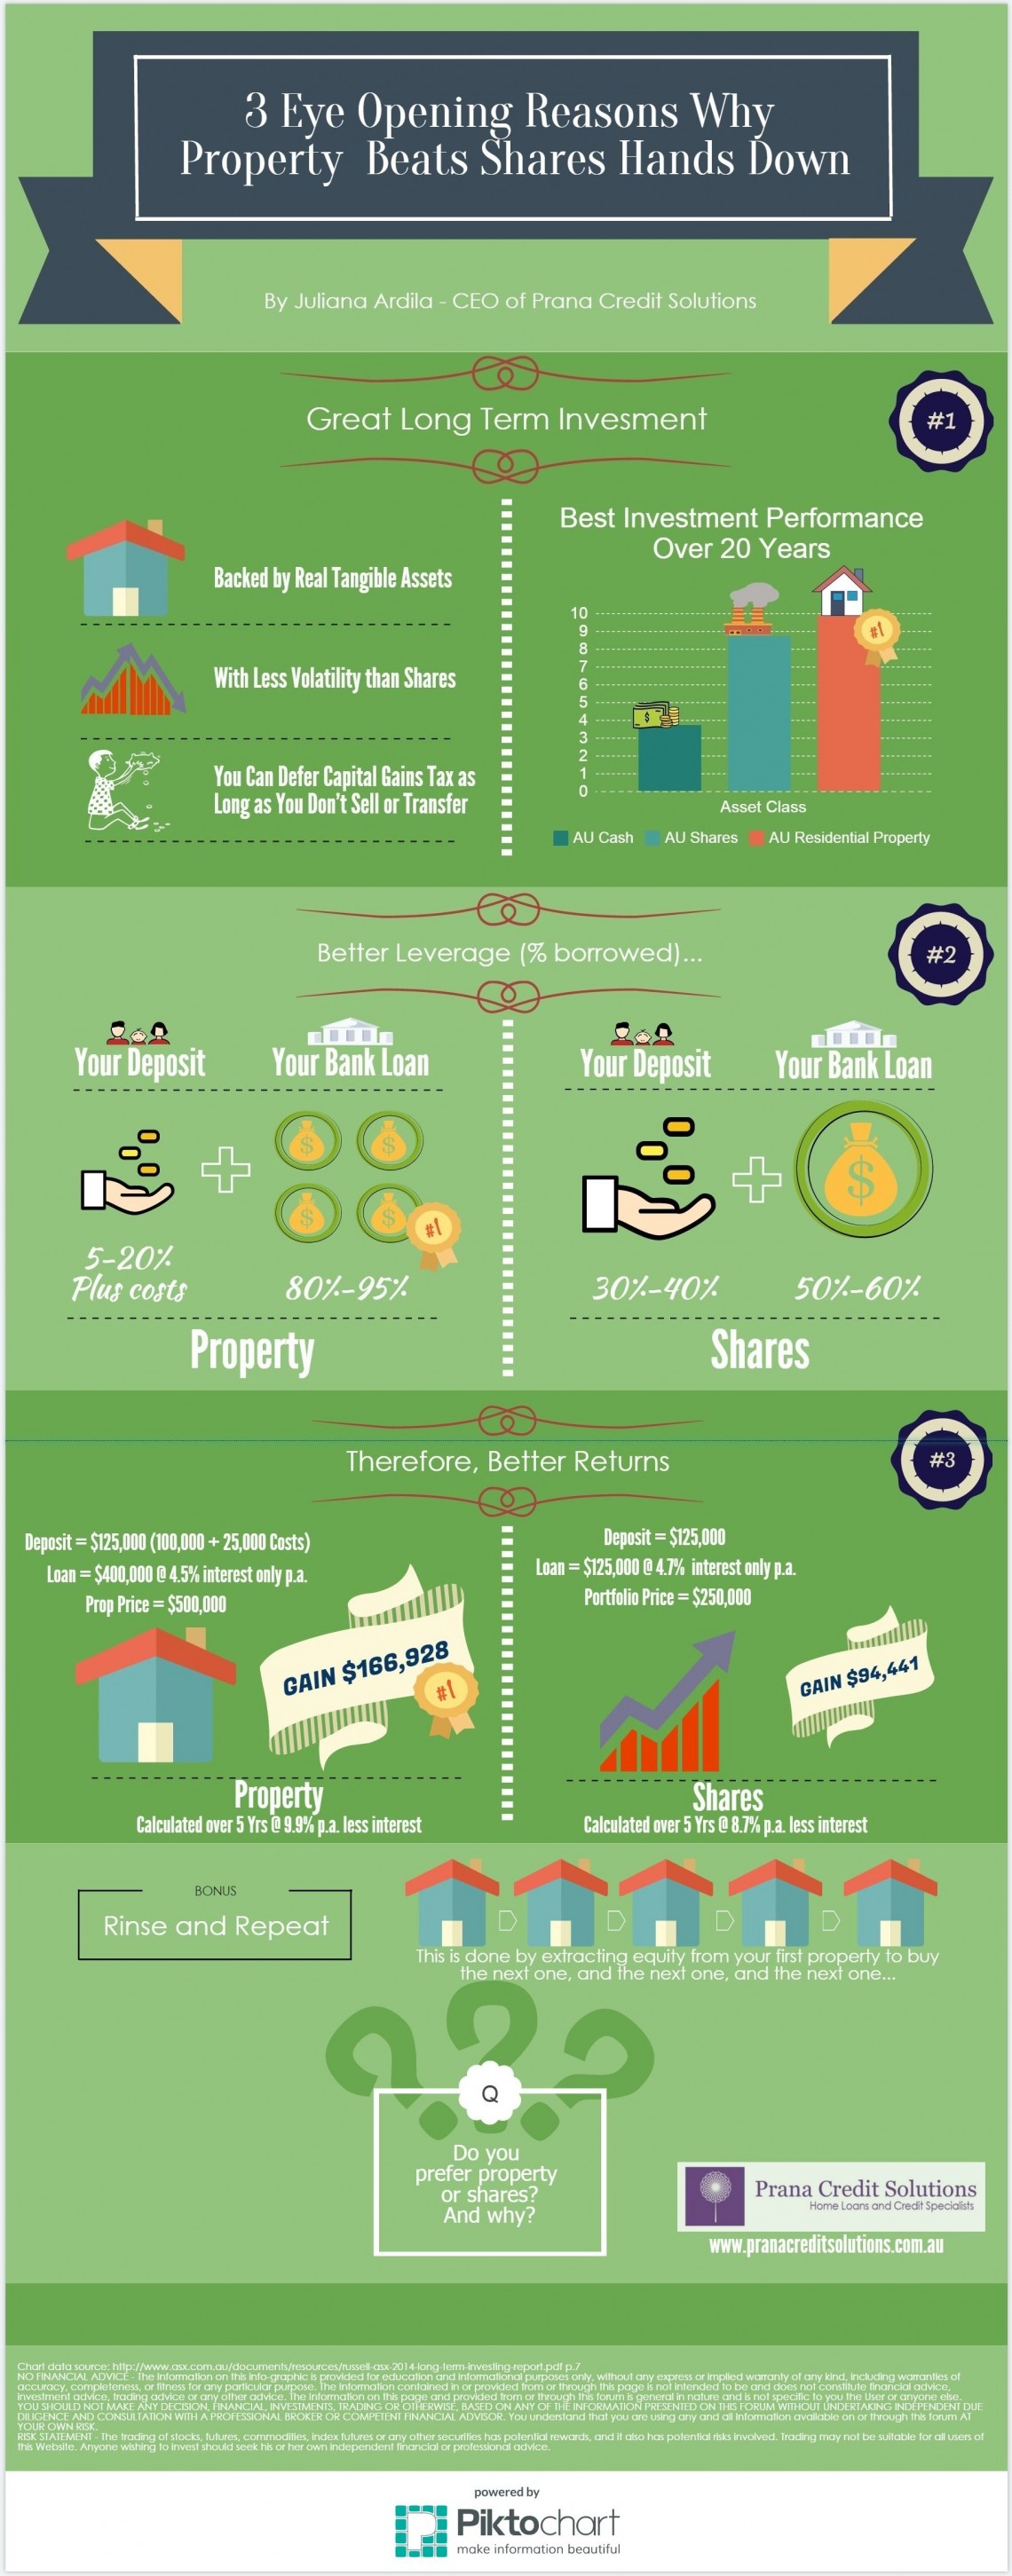 3 Eye Opening Reasons Why Property Beats Shares Hands Down Infographic large